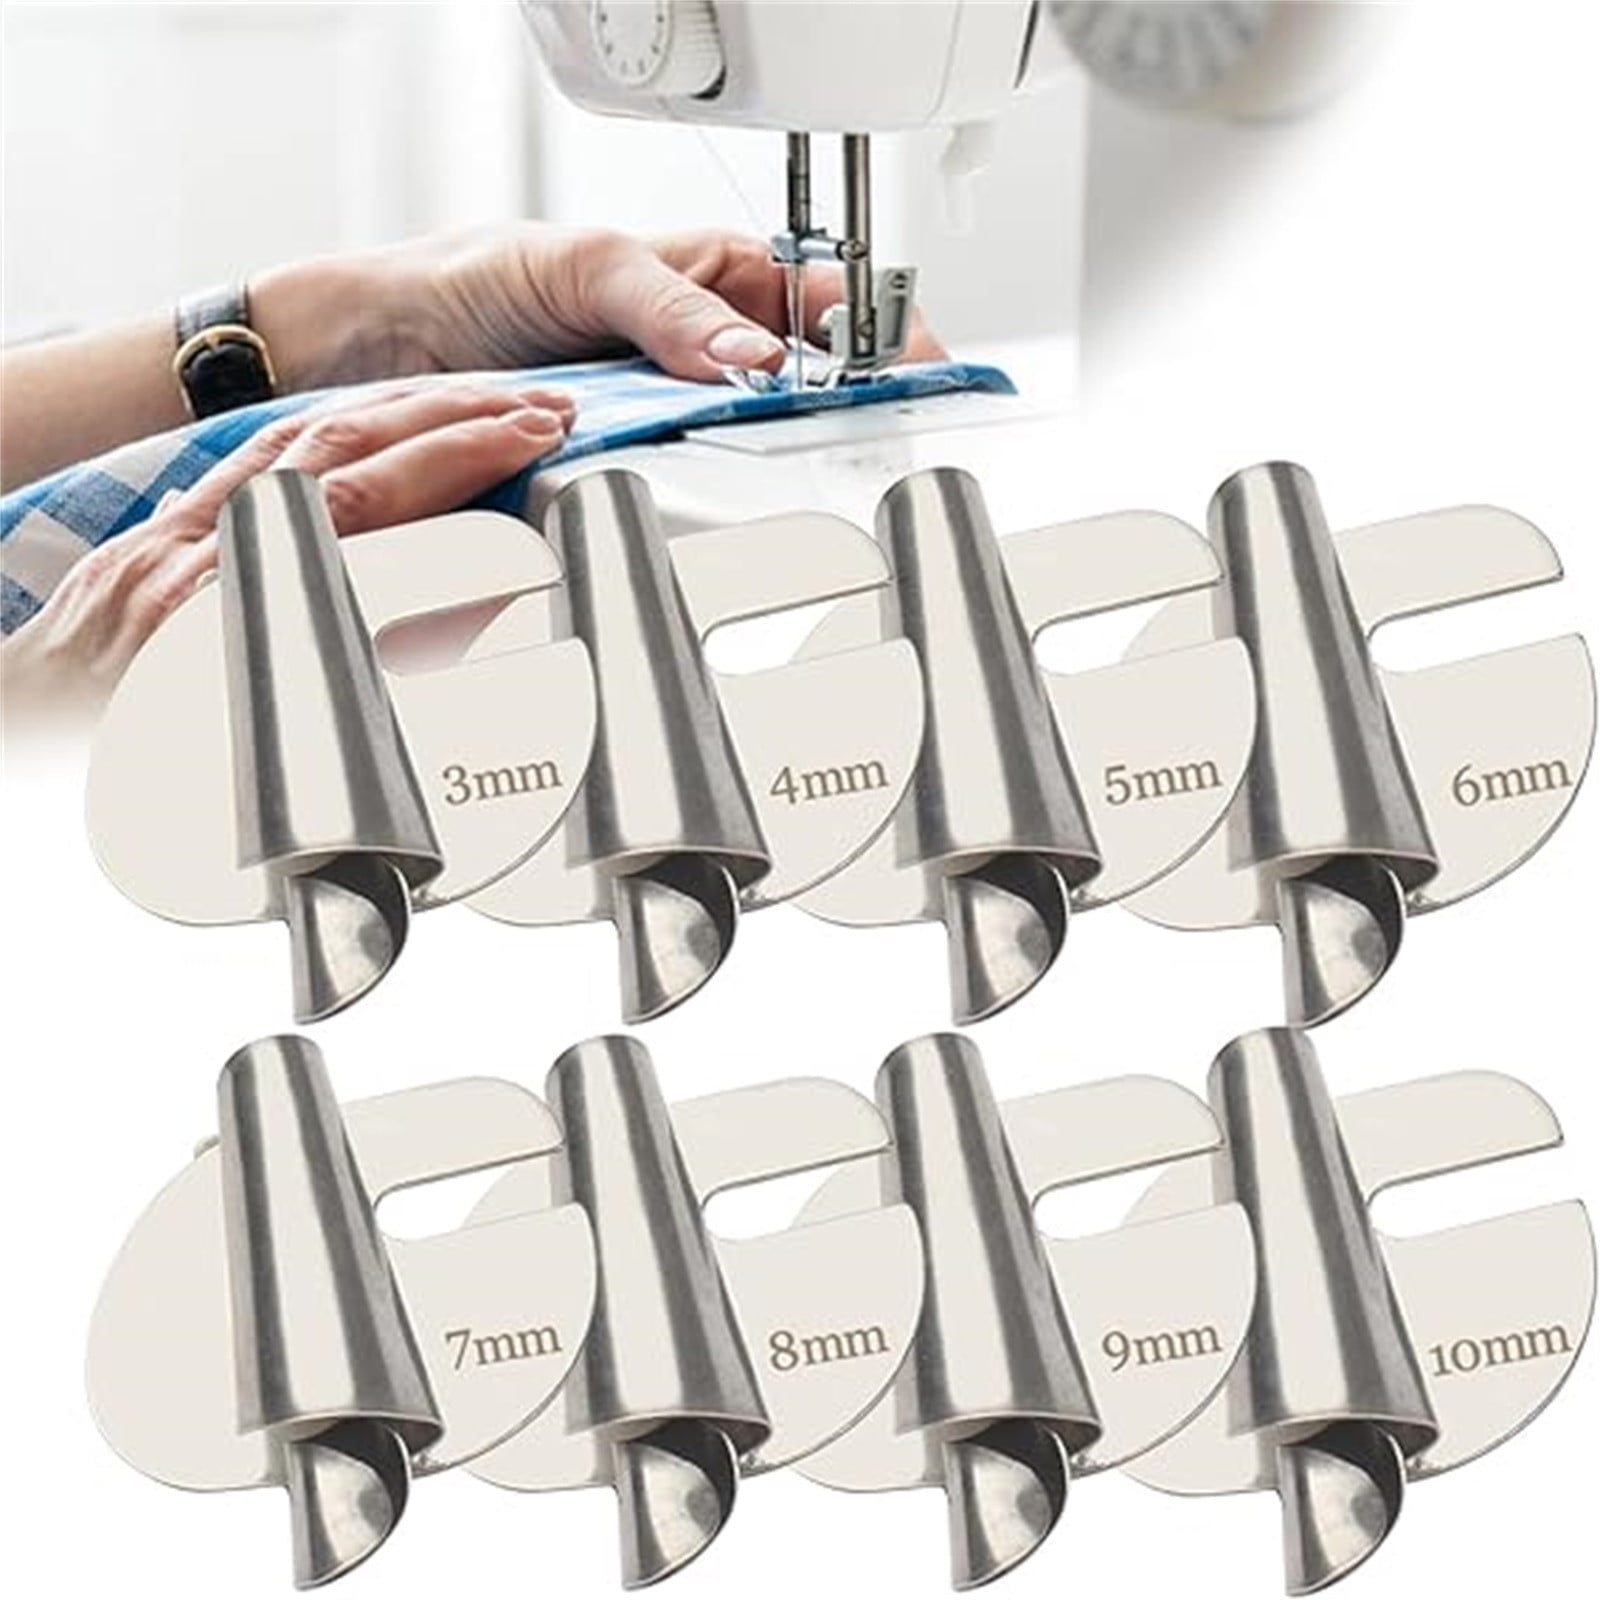 Rolled Hemmer Foot | Metal Presser Sewing Foot for 3-10mm Hems | Curved  Sewing Machine Accessories, 8pcs Universal Sewing Foot Attachments for  Home